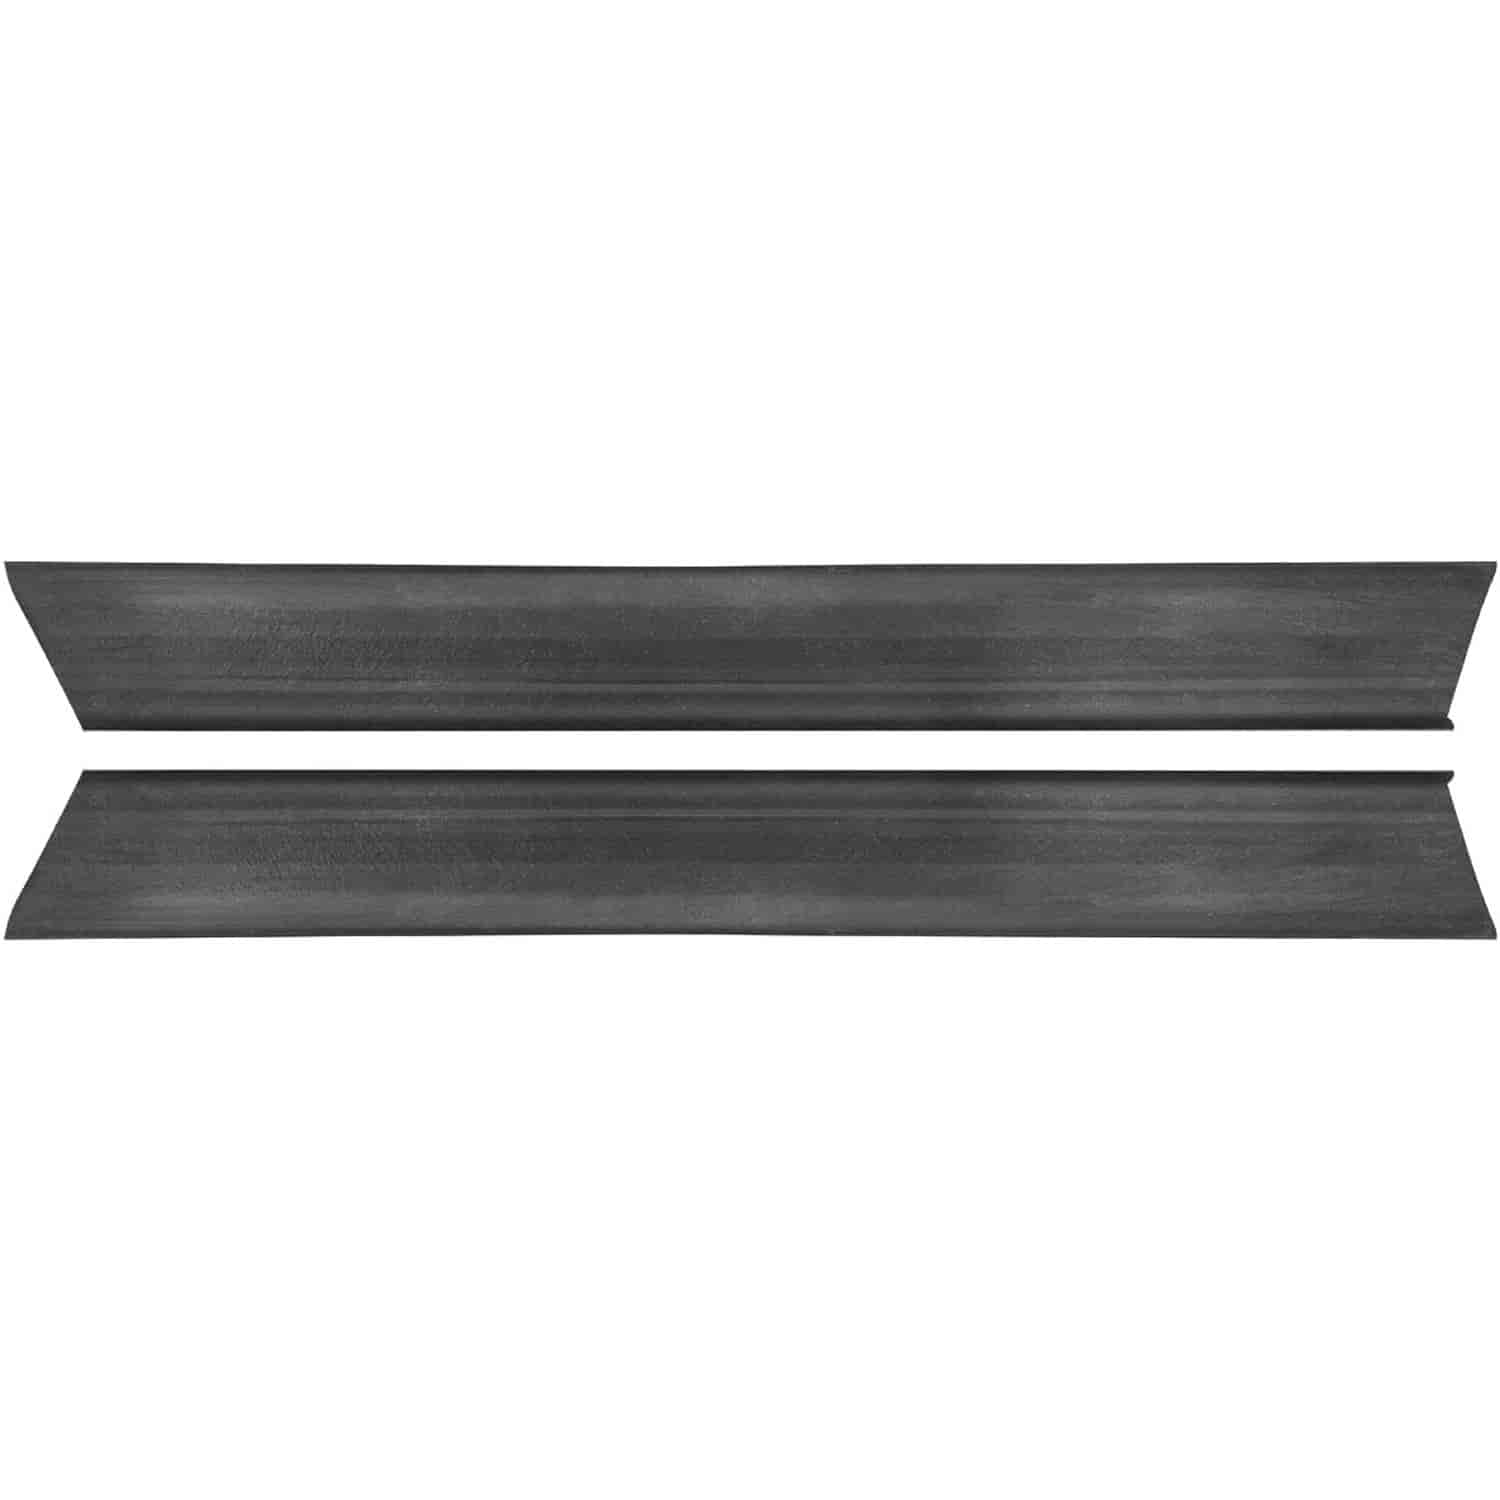 Hood-To-Cowl Seal Cowl Weatherstrips 1970-1972 Chevelle/El Camino SS